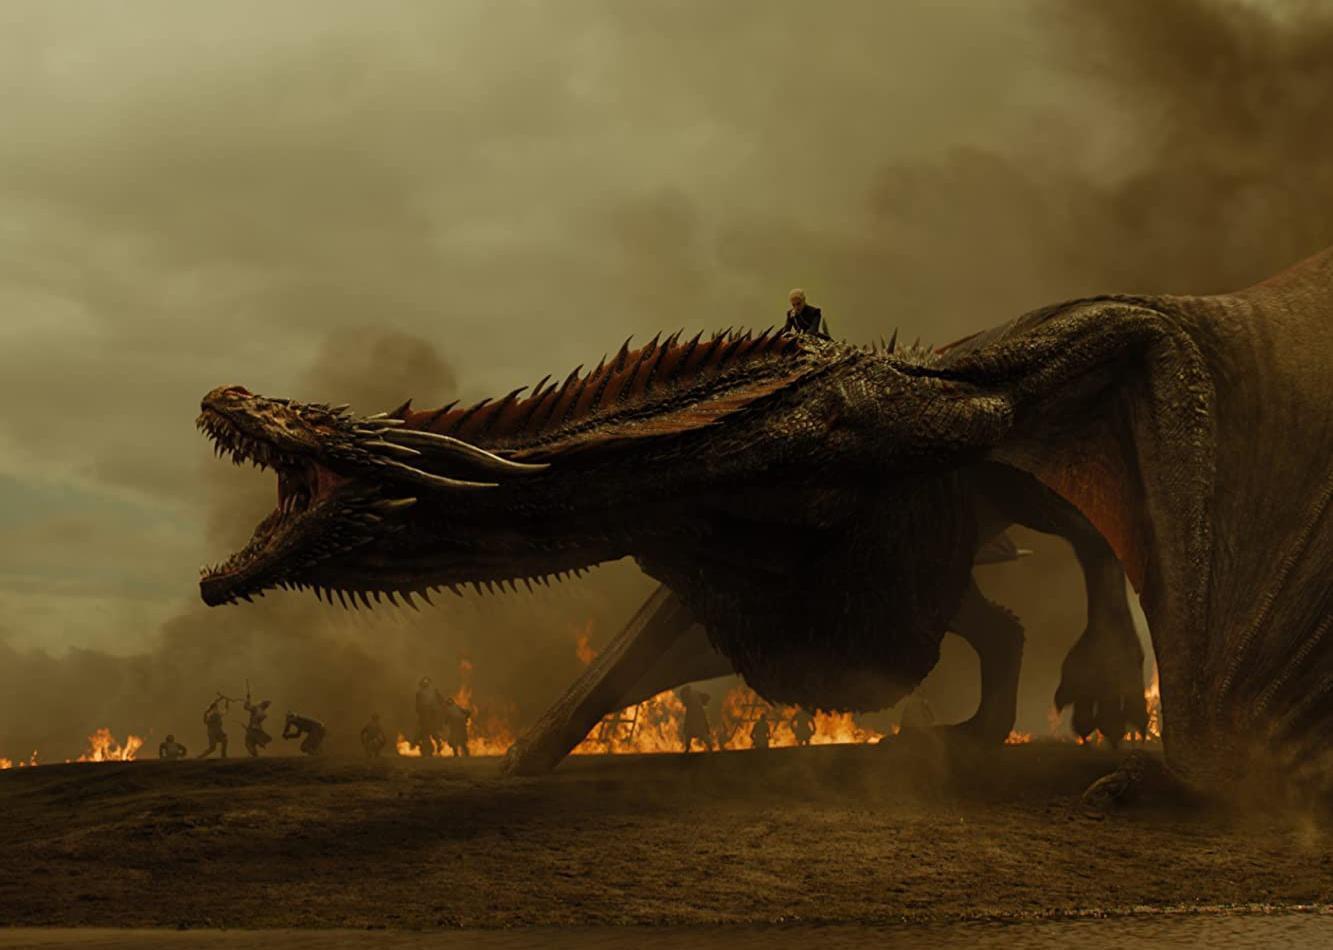 A giant dragon in a battle with people with fire in the background.